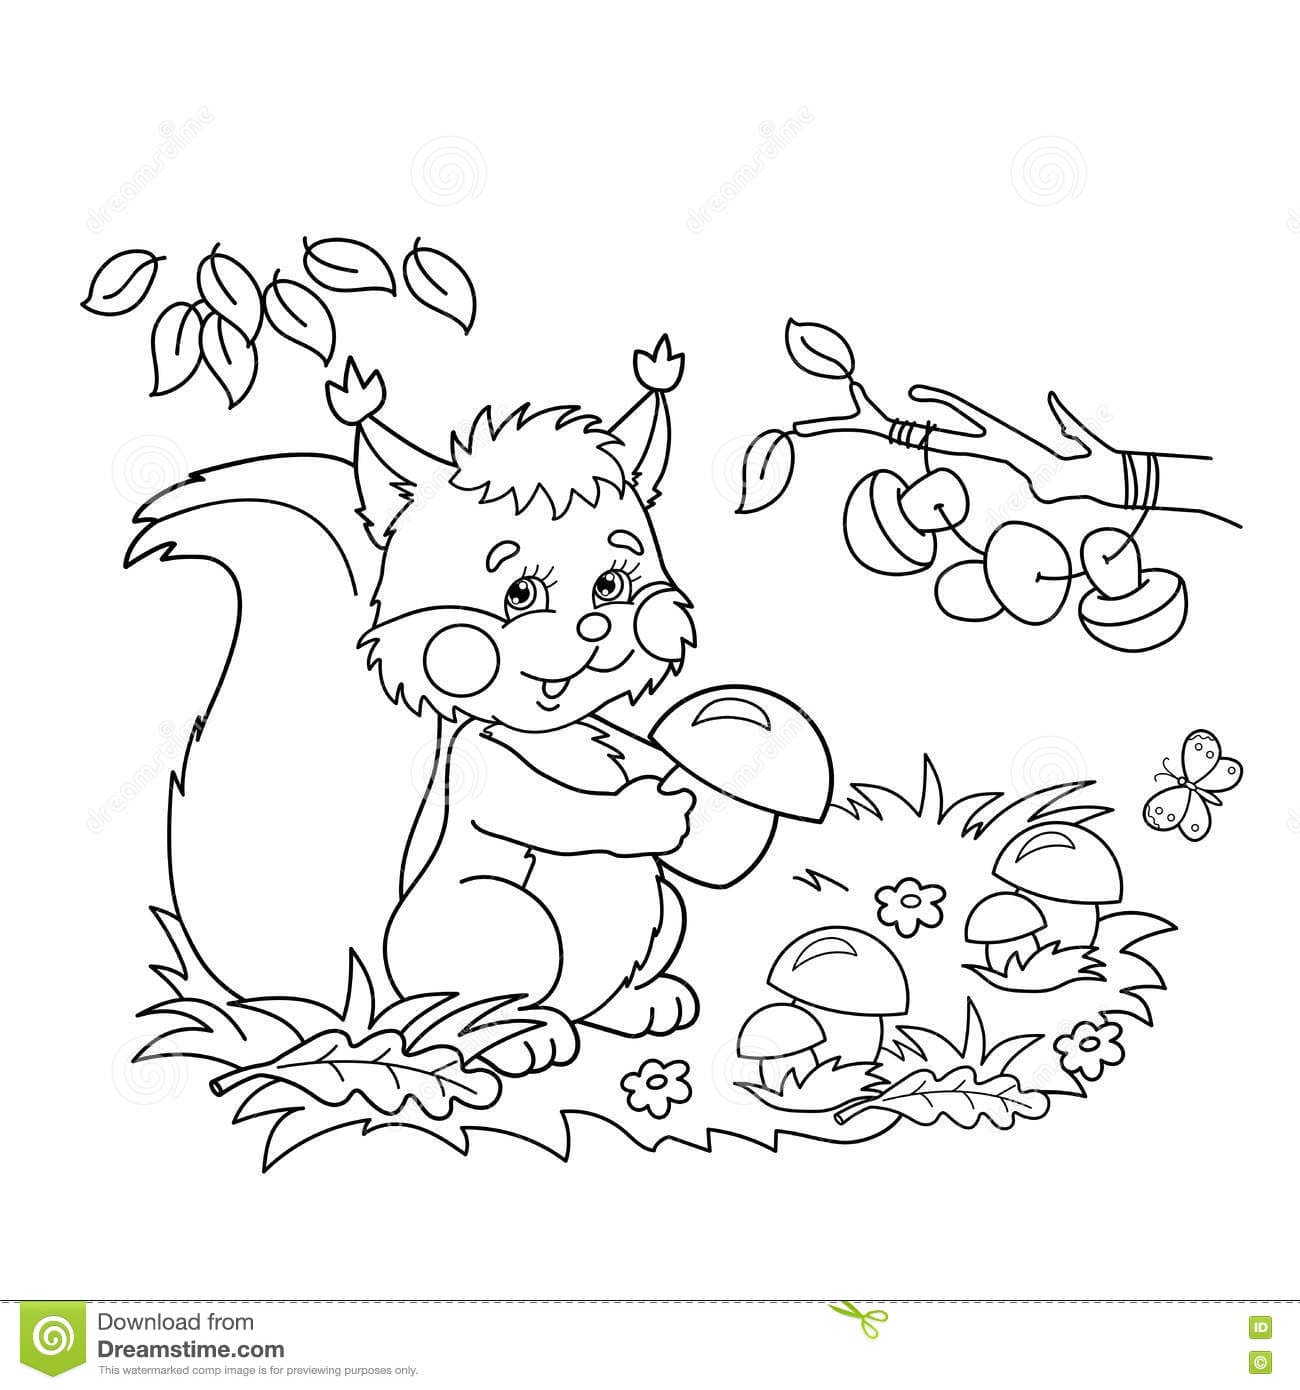 Coloring Page Outline Of Cartoon Squirrel With Mushrooms In The Meadow With Butterflies Coloring Page